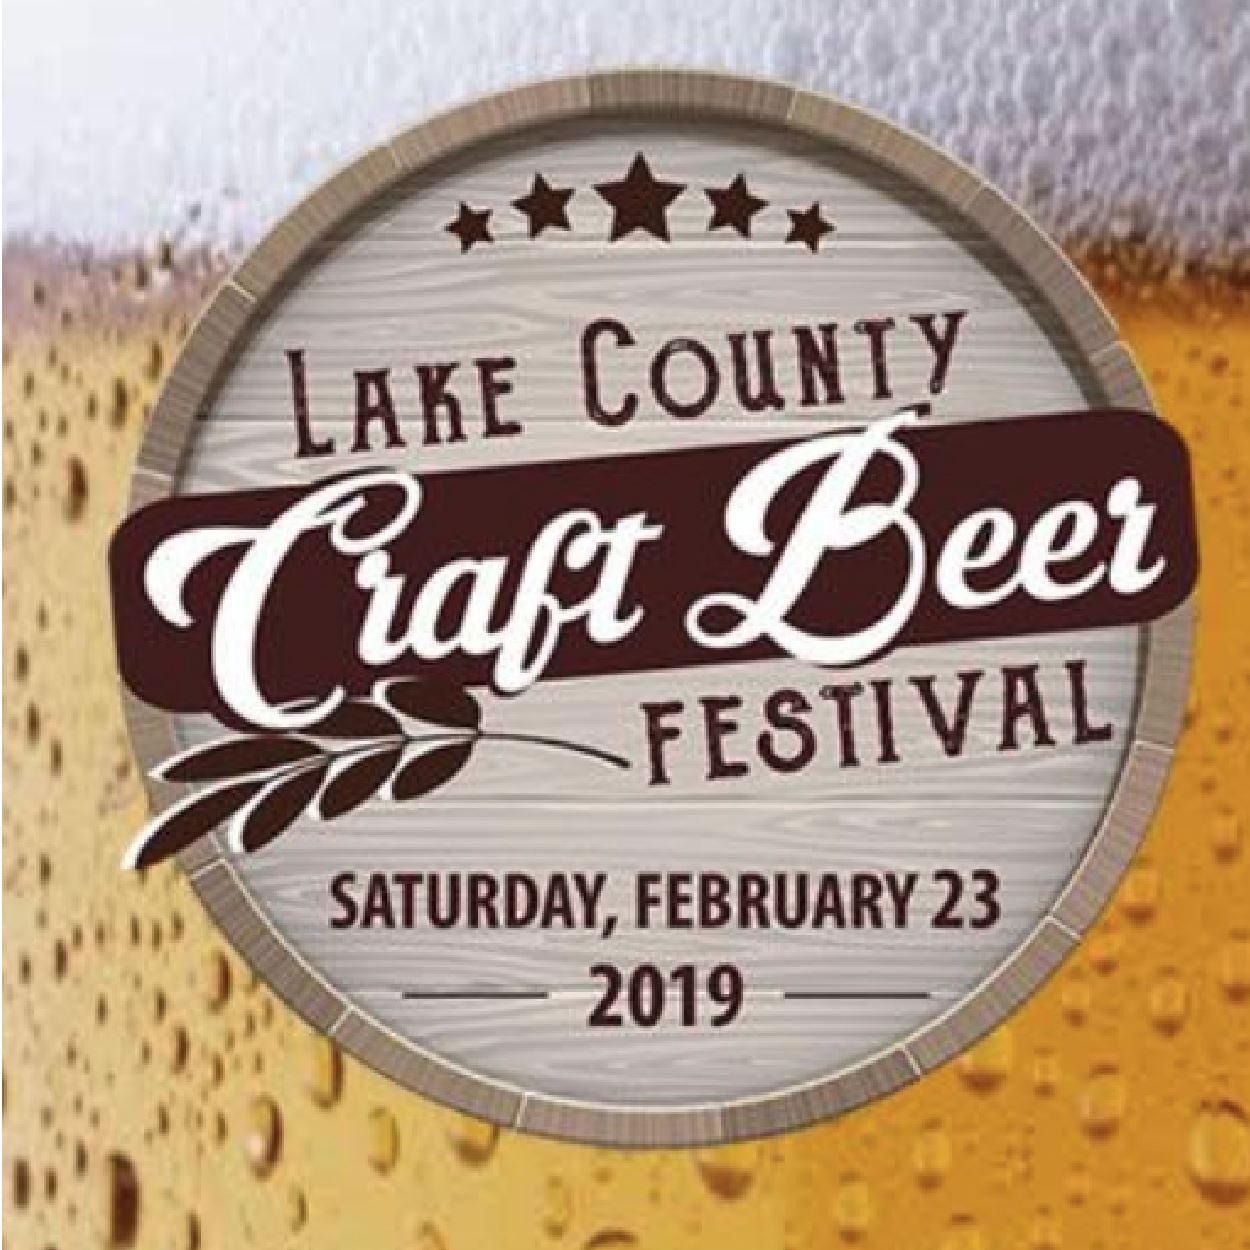 Lake County Craft Beer Festival